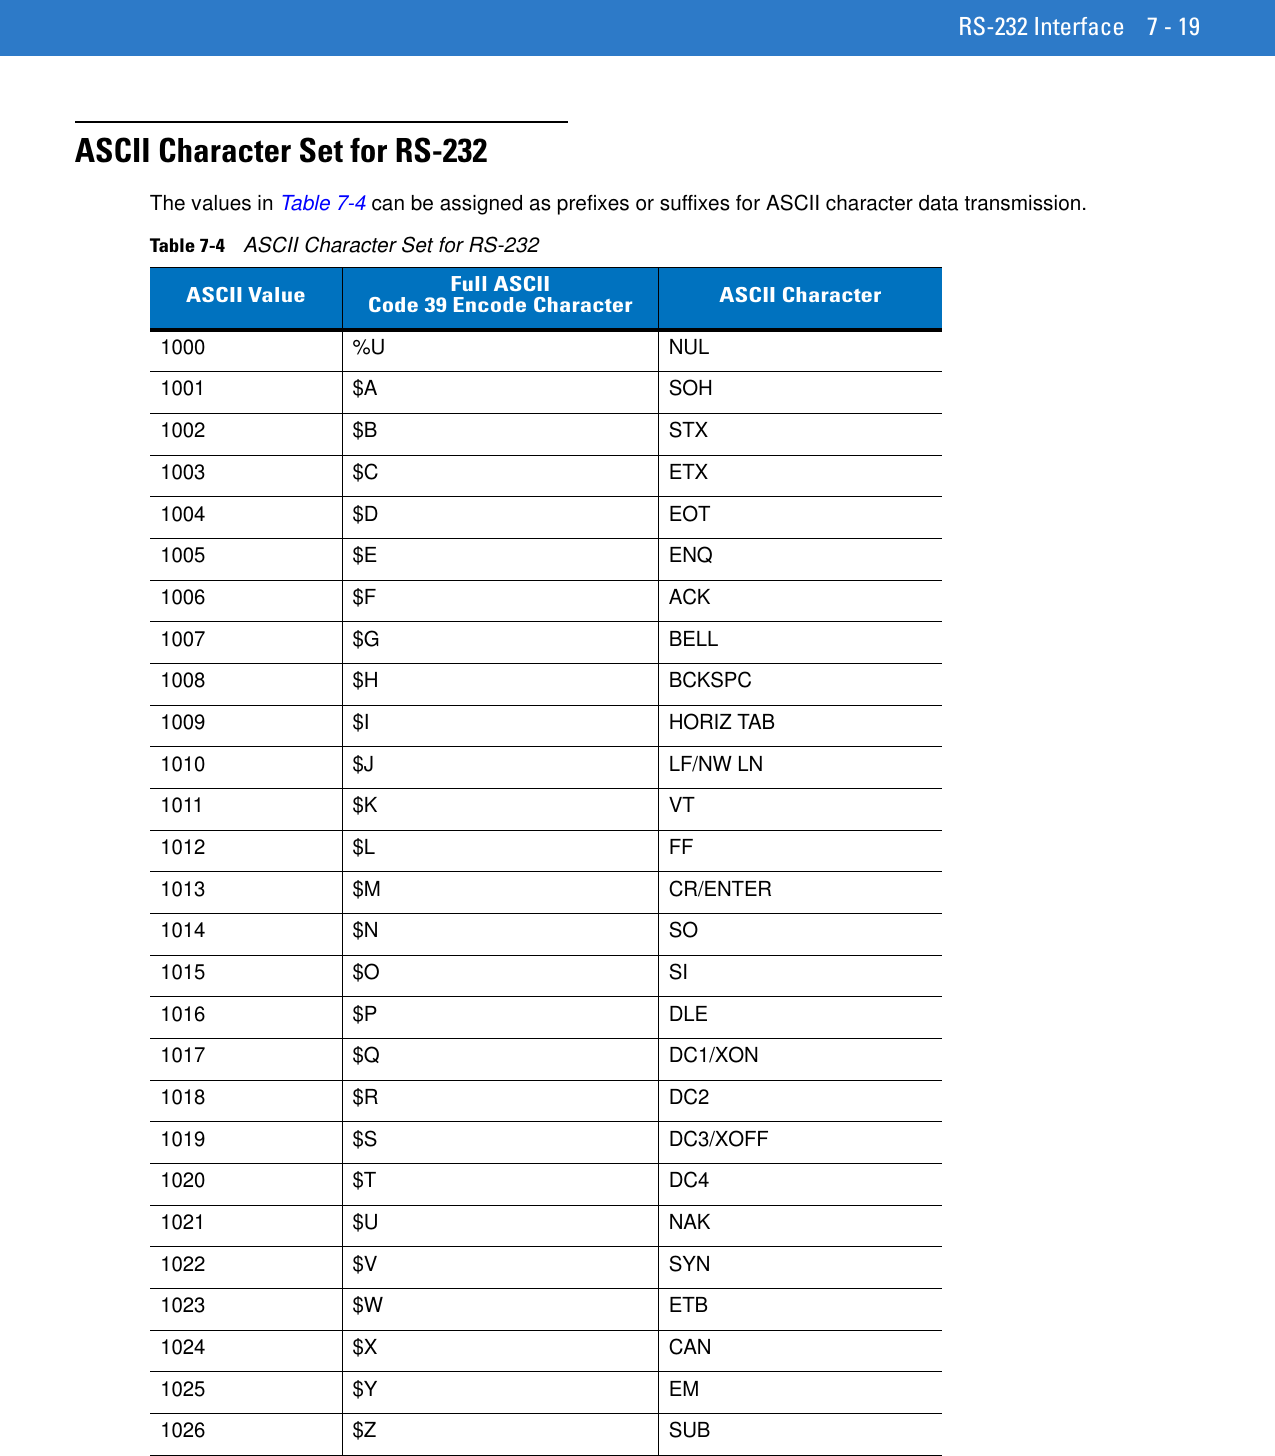 RS-232 Interface 7 - 19ASCII Character Set for RS-232The values in Table 7-4 can be assigned as prefixes or suffixes for ASCII character data transmission.Table 7-4    ASCII Character Set for RS-232ASCII Value Full ASCIICode 39 Encode Character ASCII Character1000 %U NUL1001 $A SOH1002 $B STX1003 $C ETX1004 $D EOT1005 $E ENQ1006 $F ACK1007 $G BELL1008 $H BCKSPC1009 $I HORIZ TAB1010 $J LF/NW LN1011 $K VT1012 $L FF1013 $M CR/ENTER1014 $N SO1015 $O SI1016 $P DLE1017 $Q DC1/XON1018 $R DC21019 $S DC3/XOFF1020 $T DC41021 $U NAK1022 $V SYN1023 $W ETB1024 $X CAN1025 $Y EM1026 $Z SUB